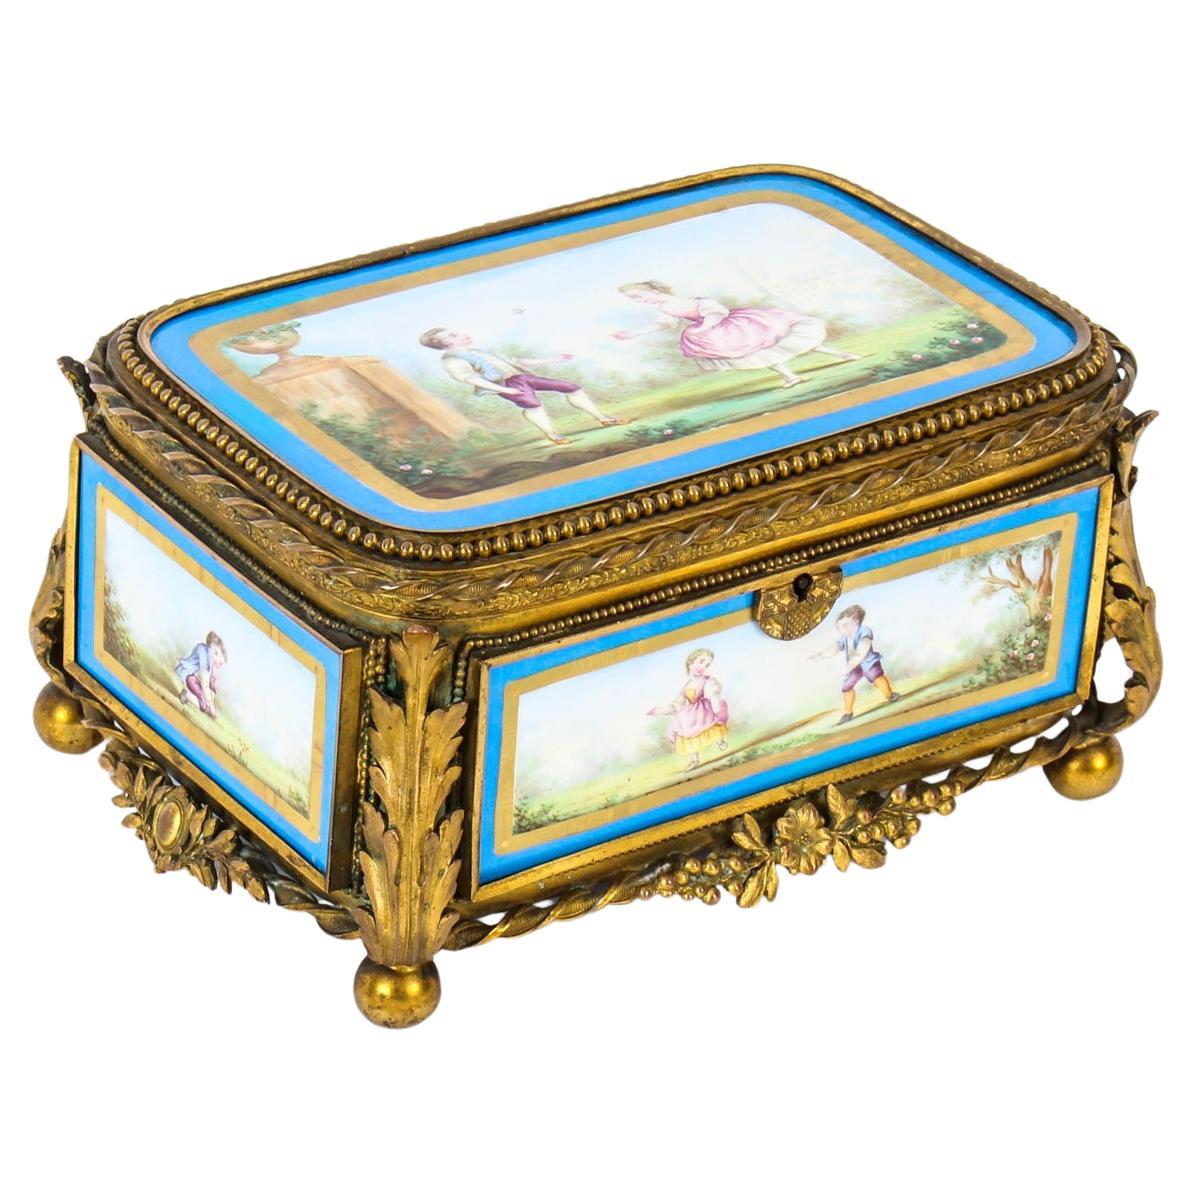 Antique French Sevres Porcelain and Ormolu Jewellery Casket 19th Century  For Sale